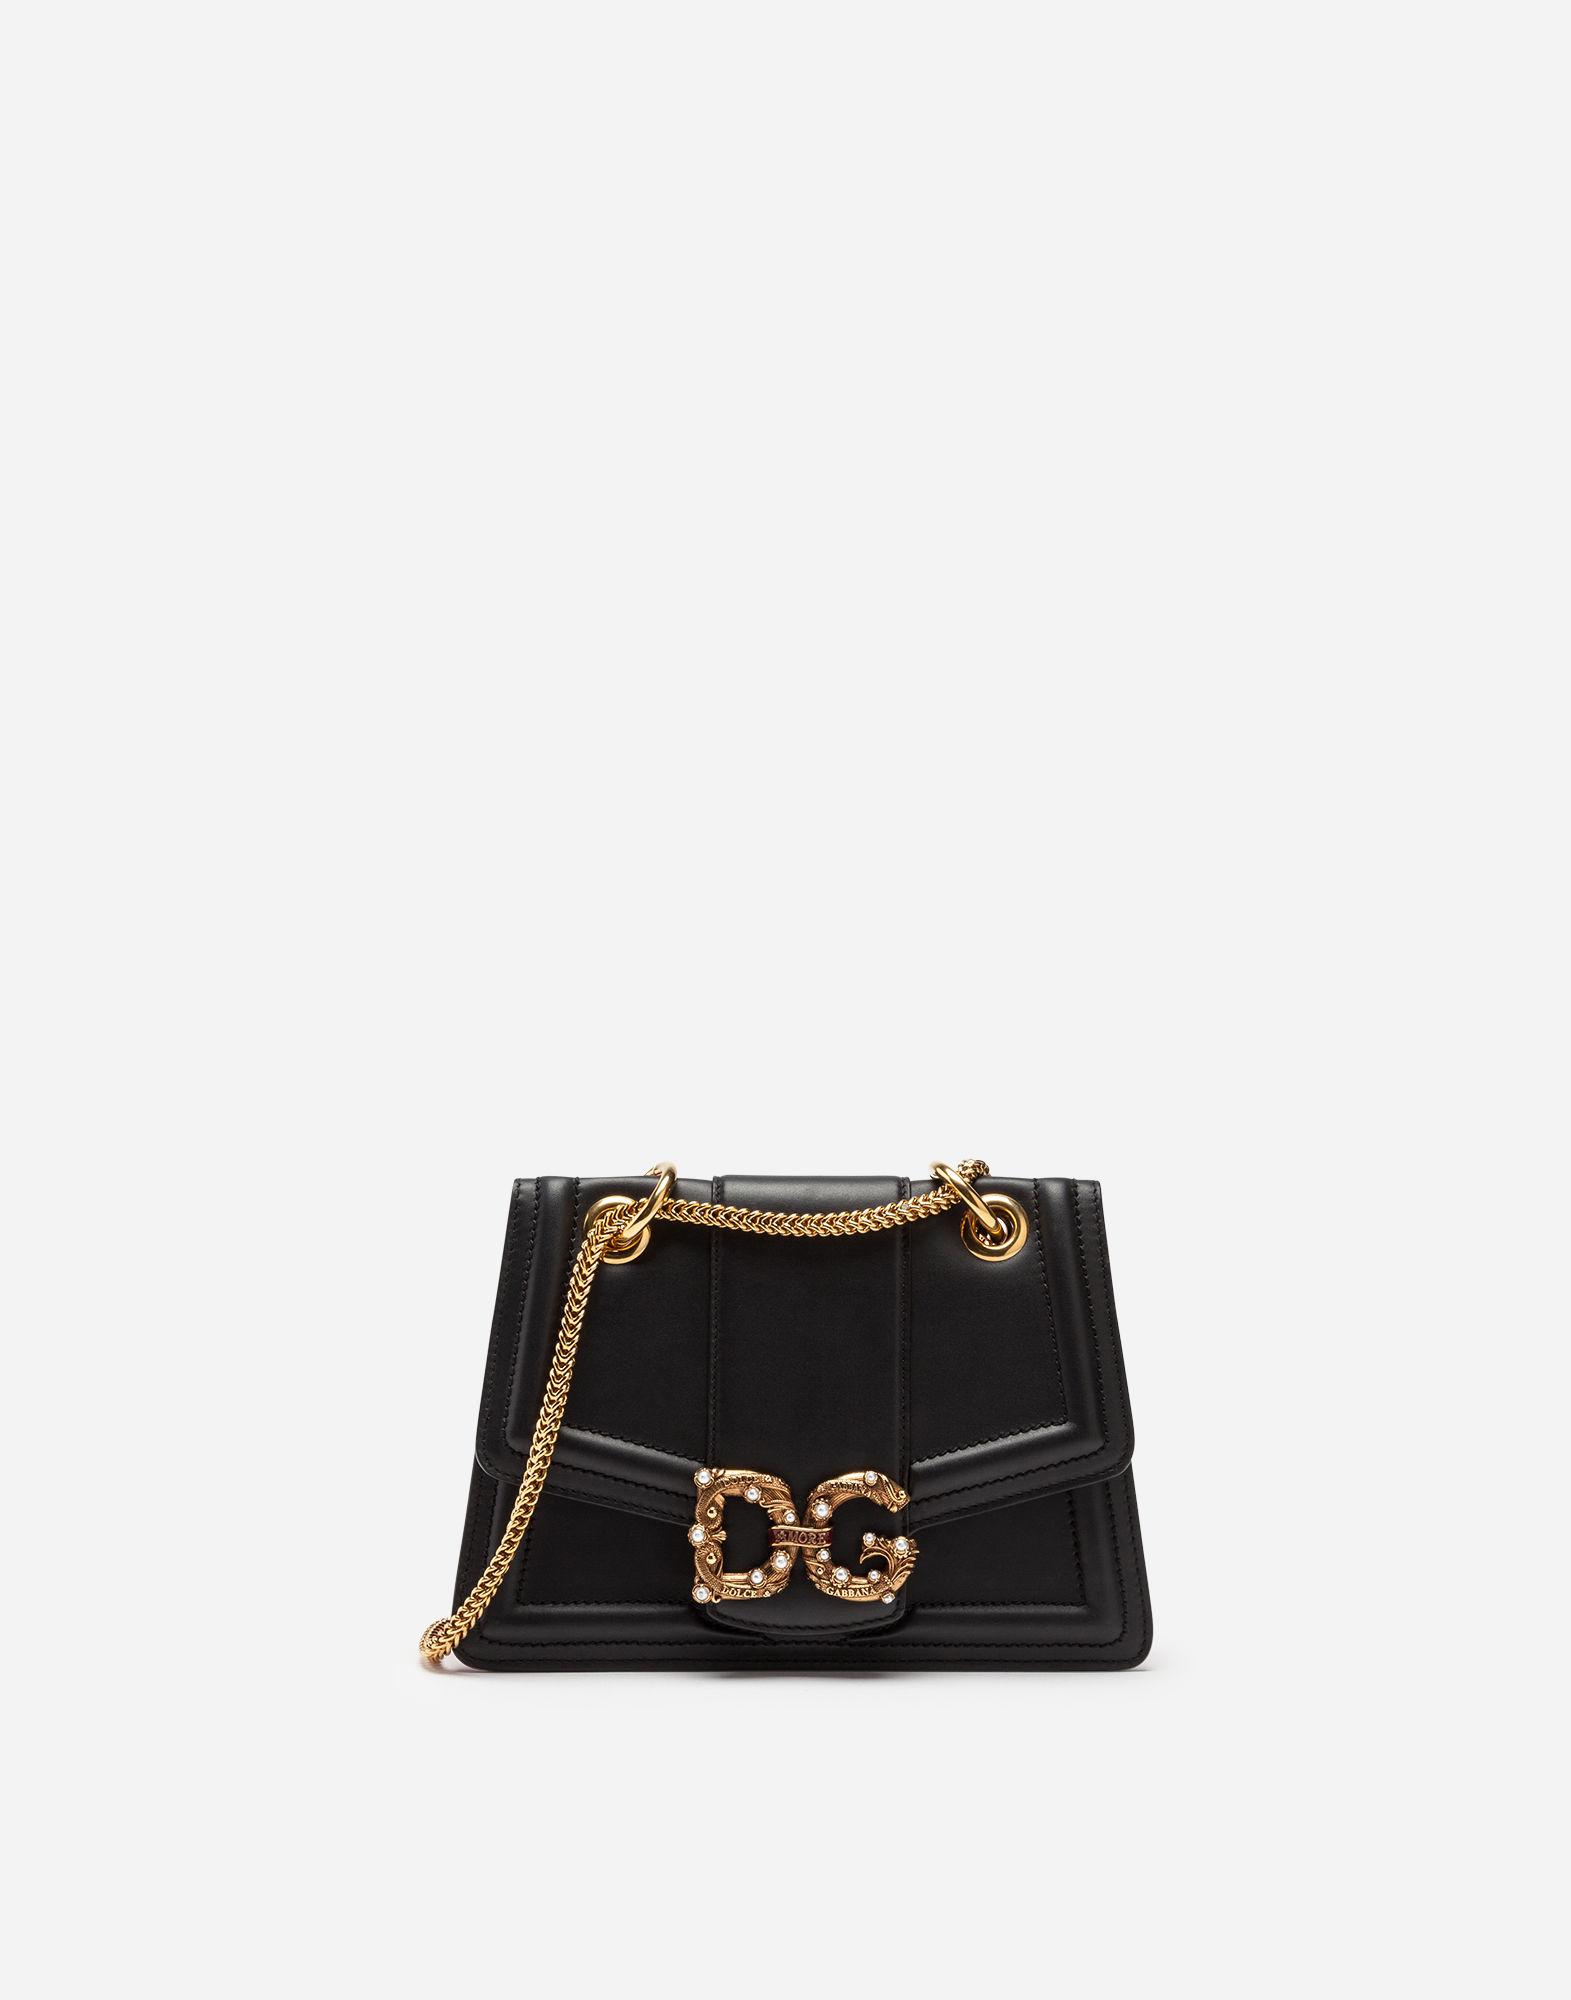 Dolce & Gabbana Leather Dg Amore Bag In Calfskin in Black - Save 40% - Lyst